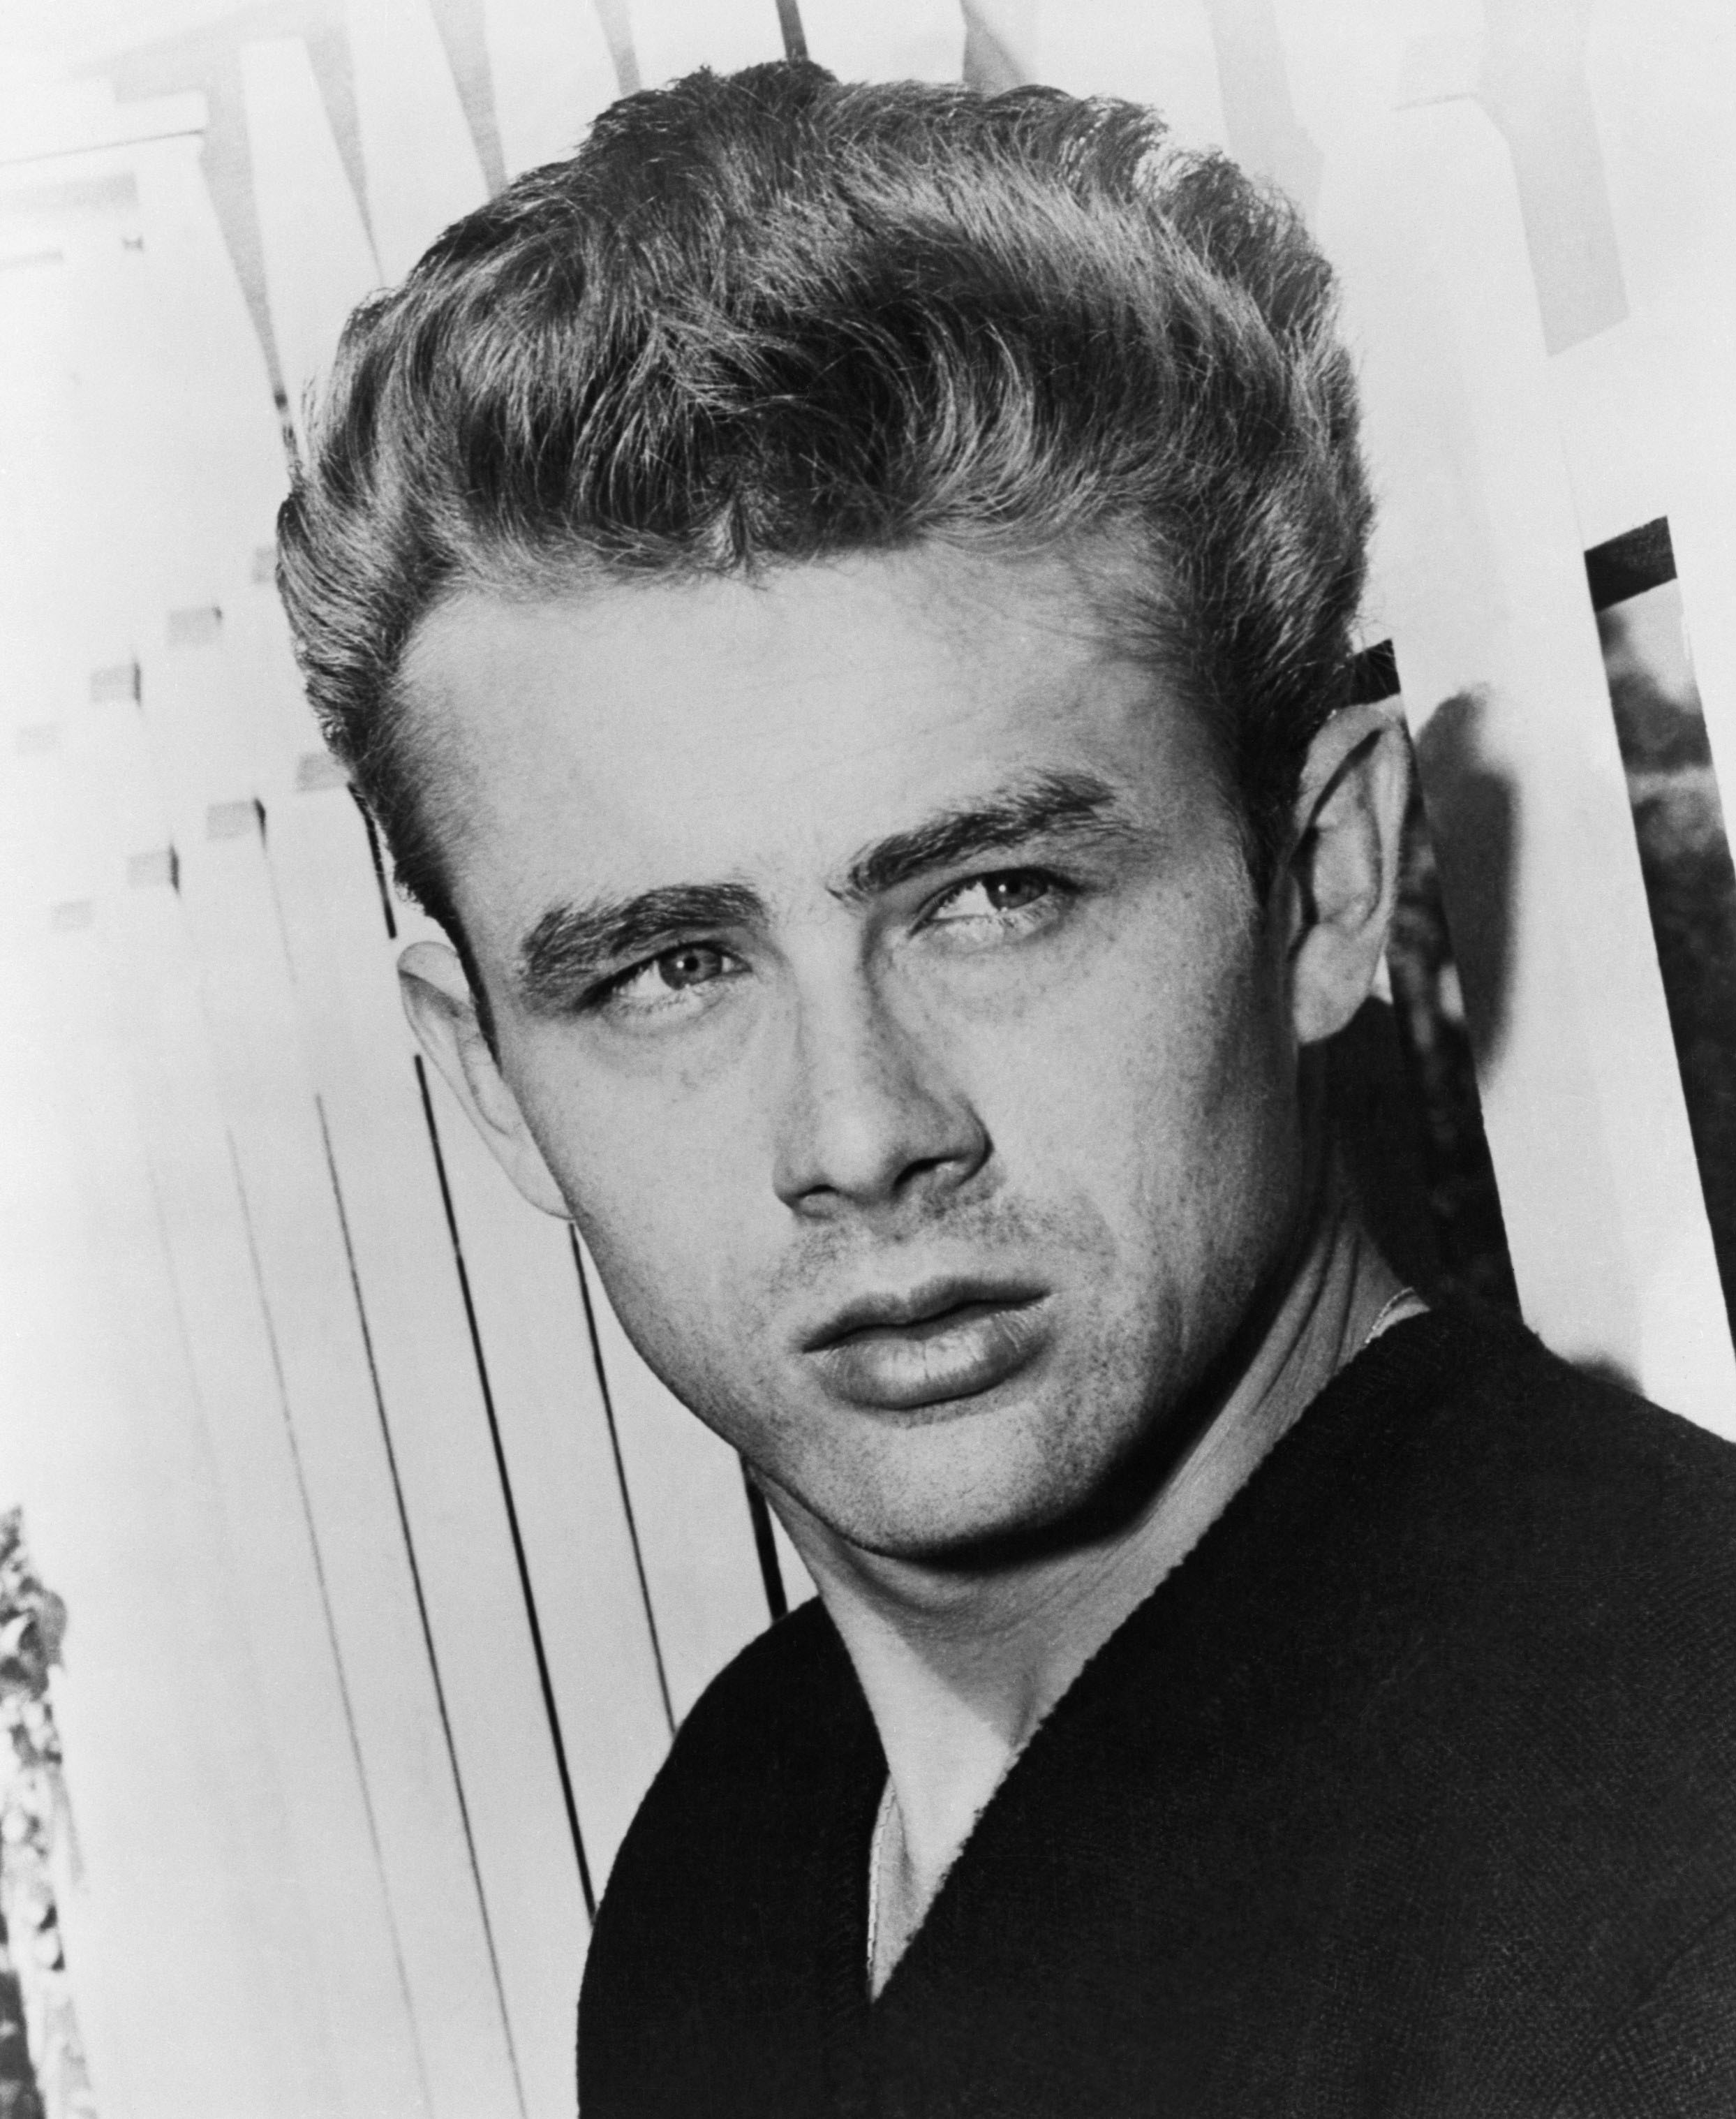 James Dean photo 62 of 62 pics, wallpaper - photo #416352 - ThePlace2